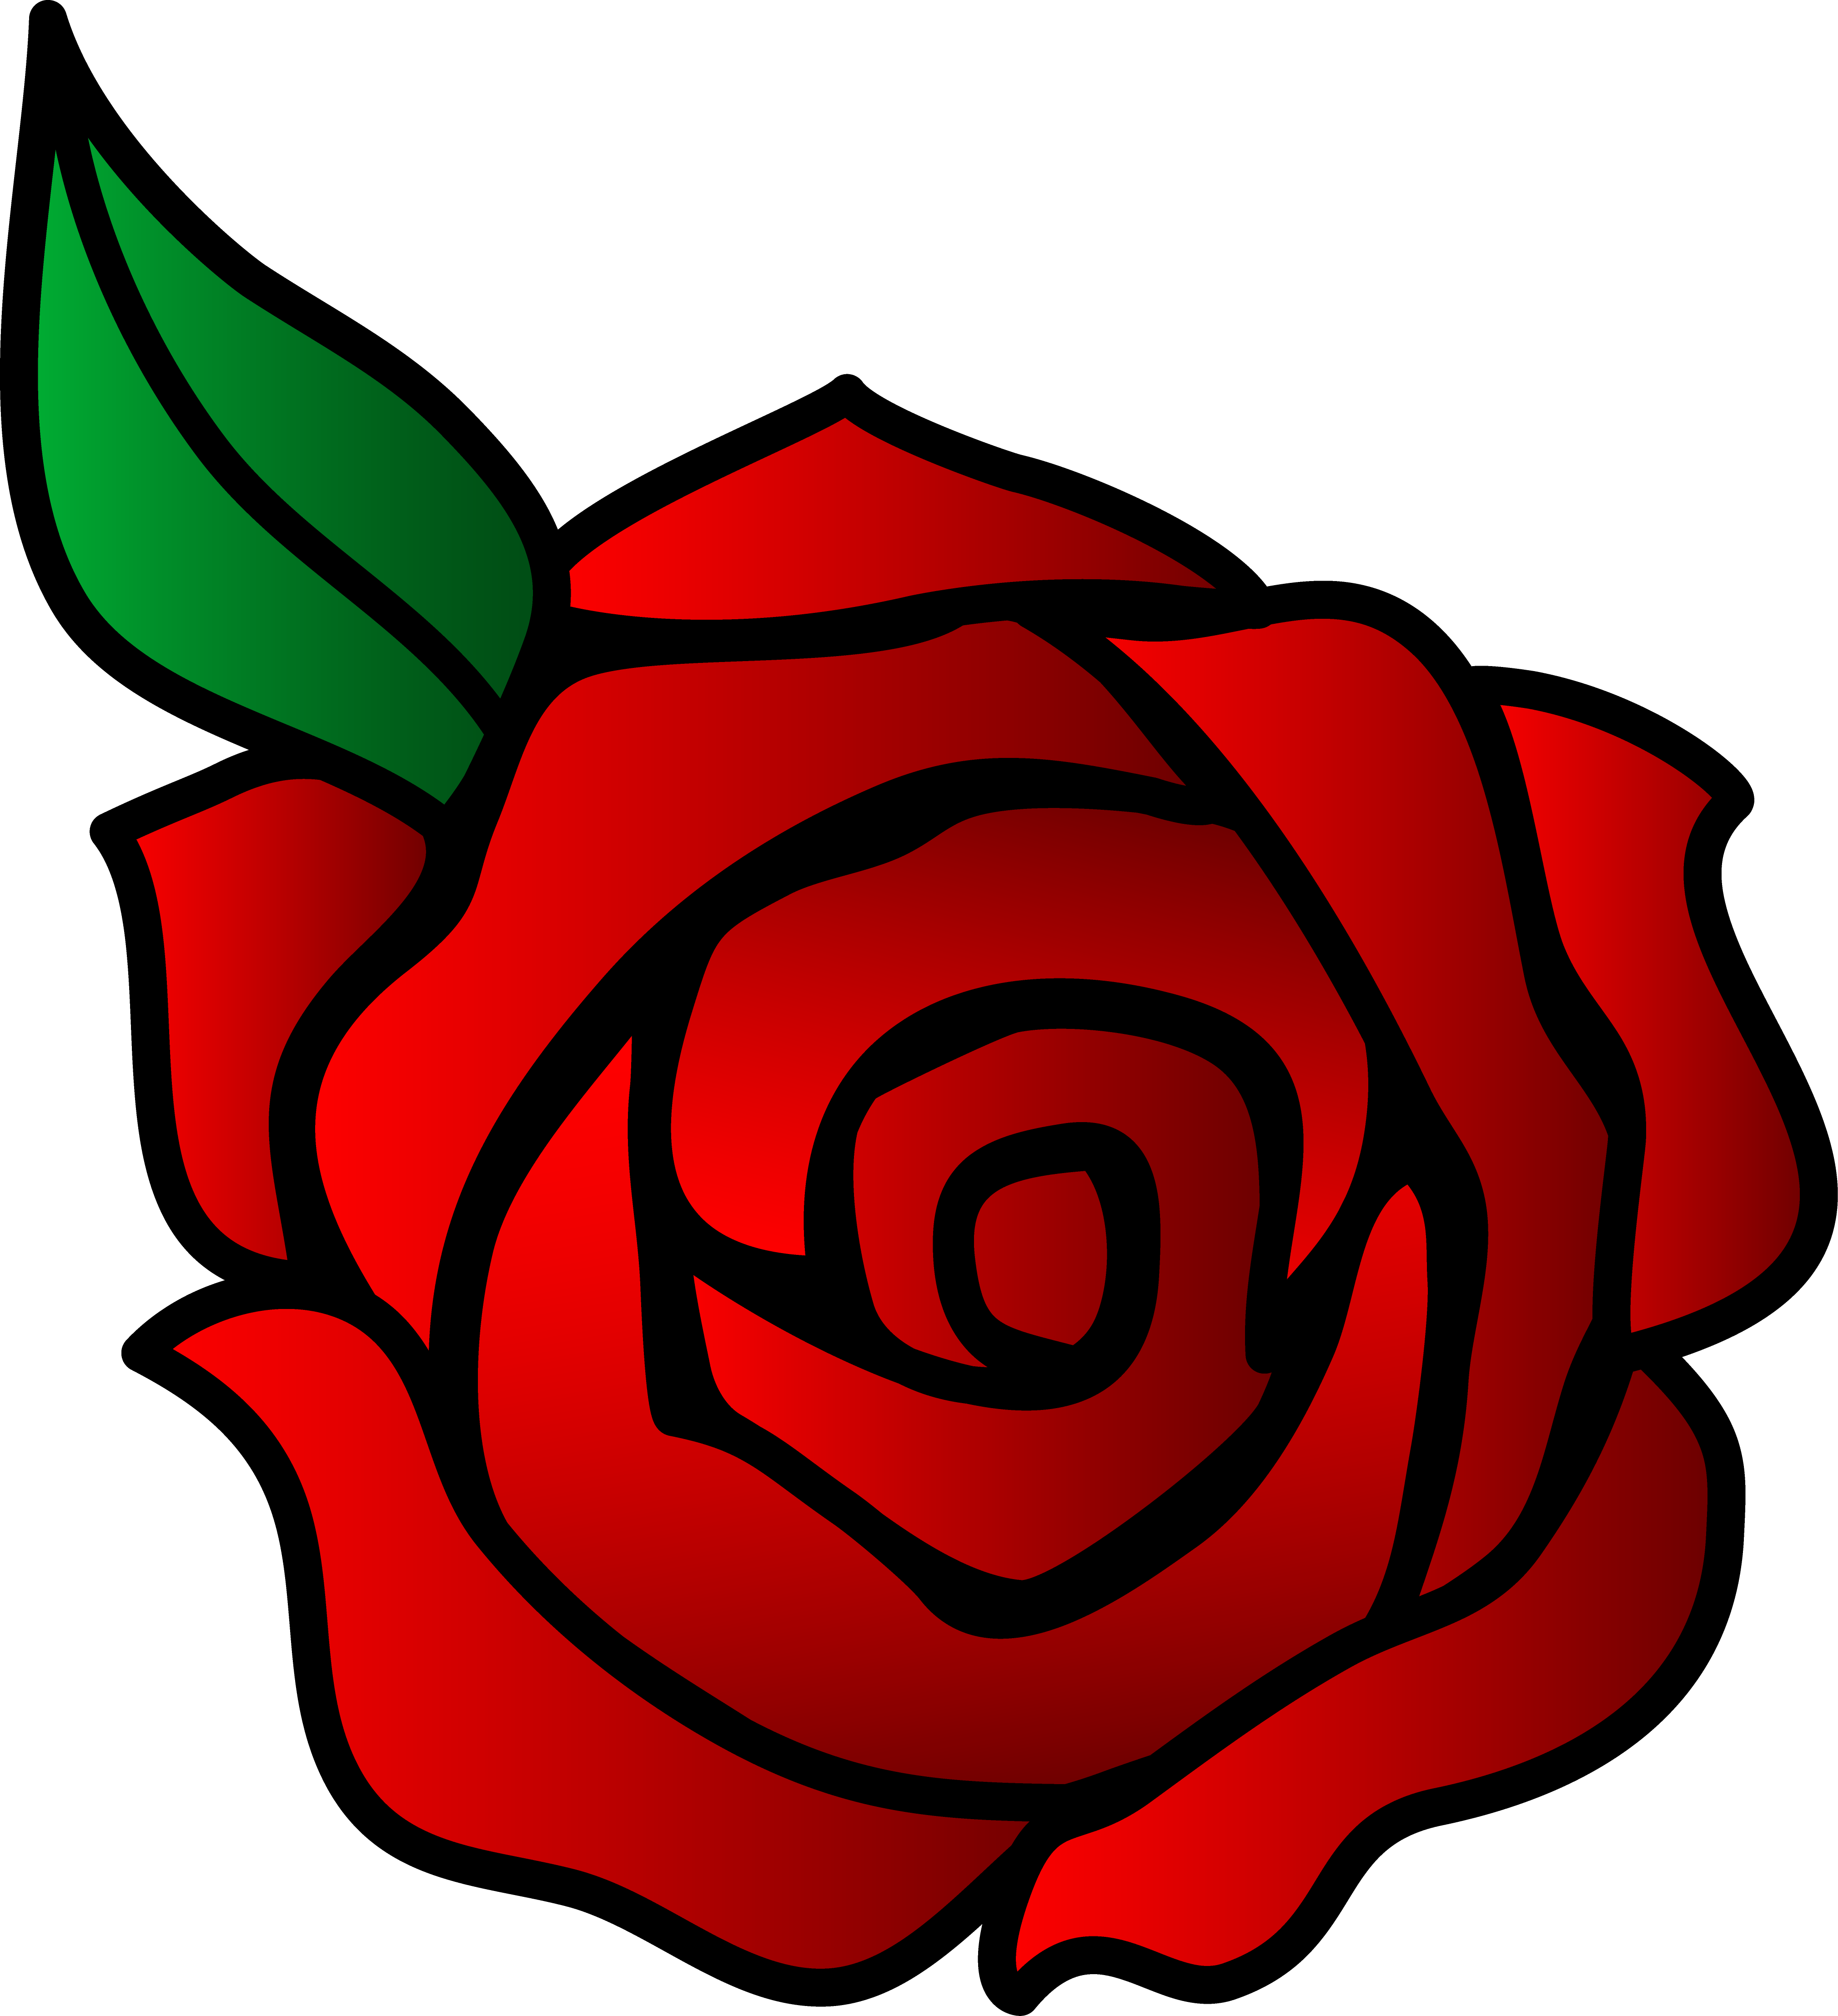 Rose cartoon drawing free download clip art on png - Clipartix